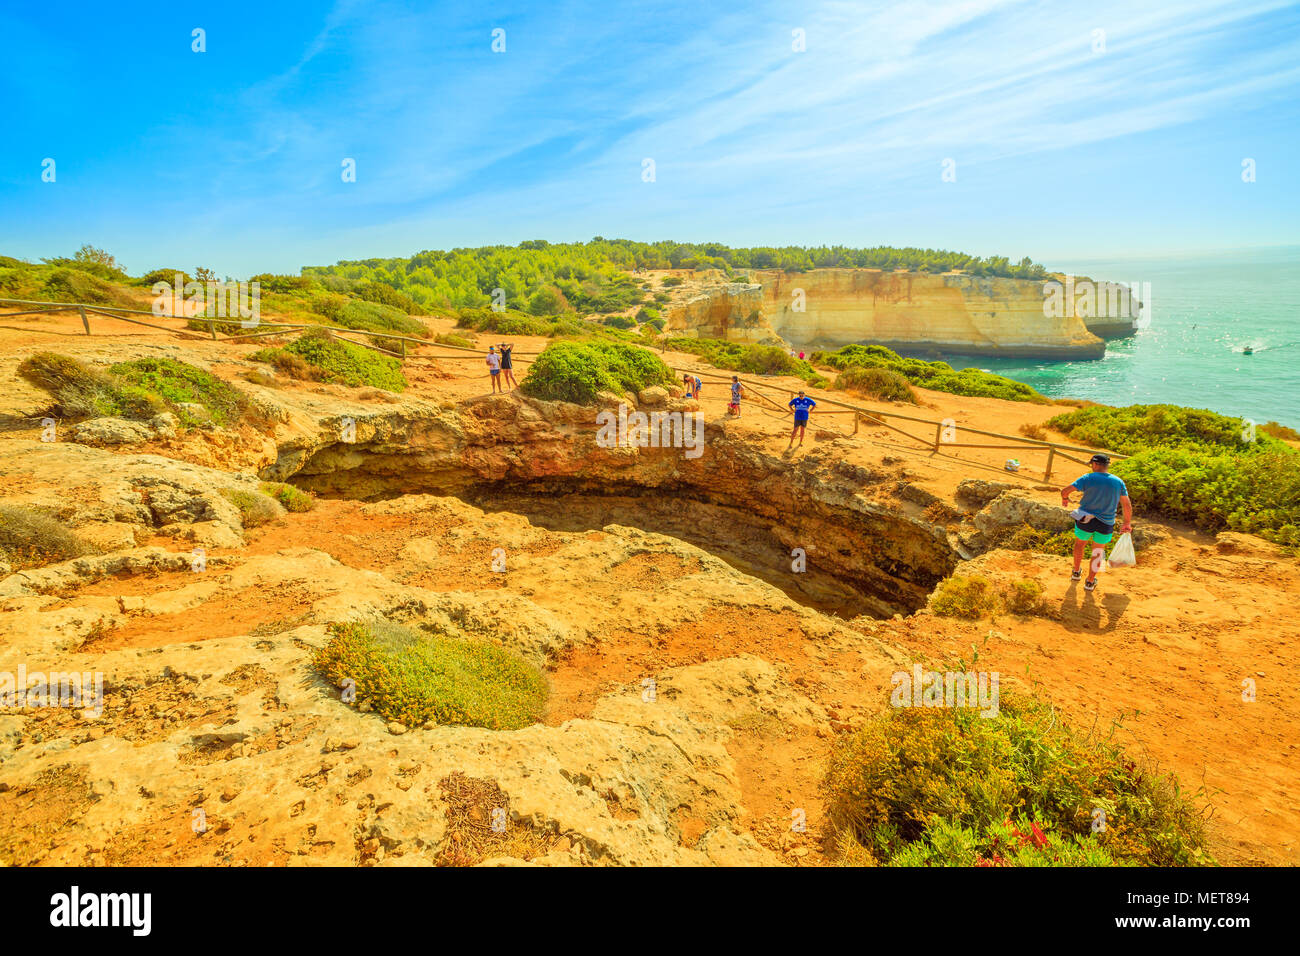 Benagil, Portugal - August 23, 2017: Benagil Cave seen from the top of rocky cliff in Algarve coast, Lagoa, Portugal. People watching the impressive sea caves from above. Summer holidays. Stock Photo